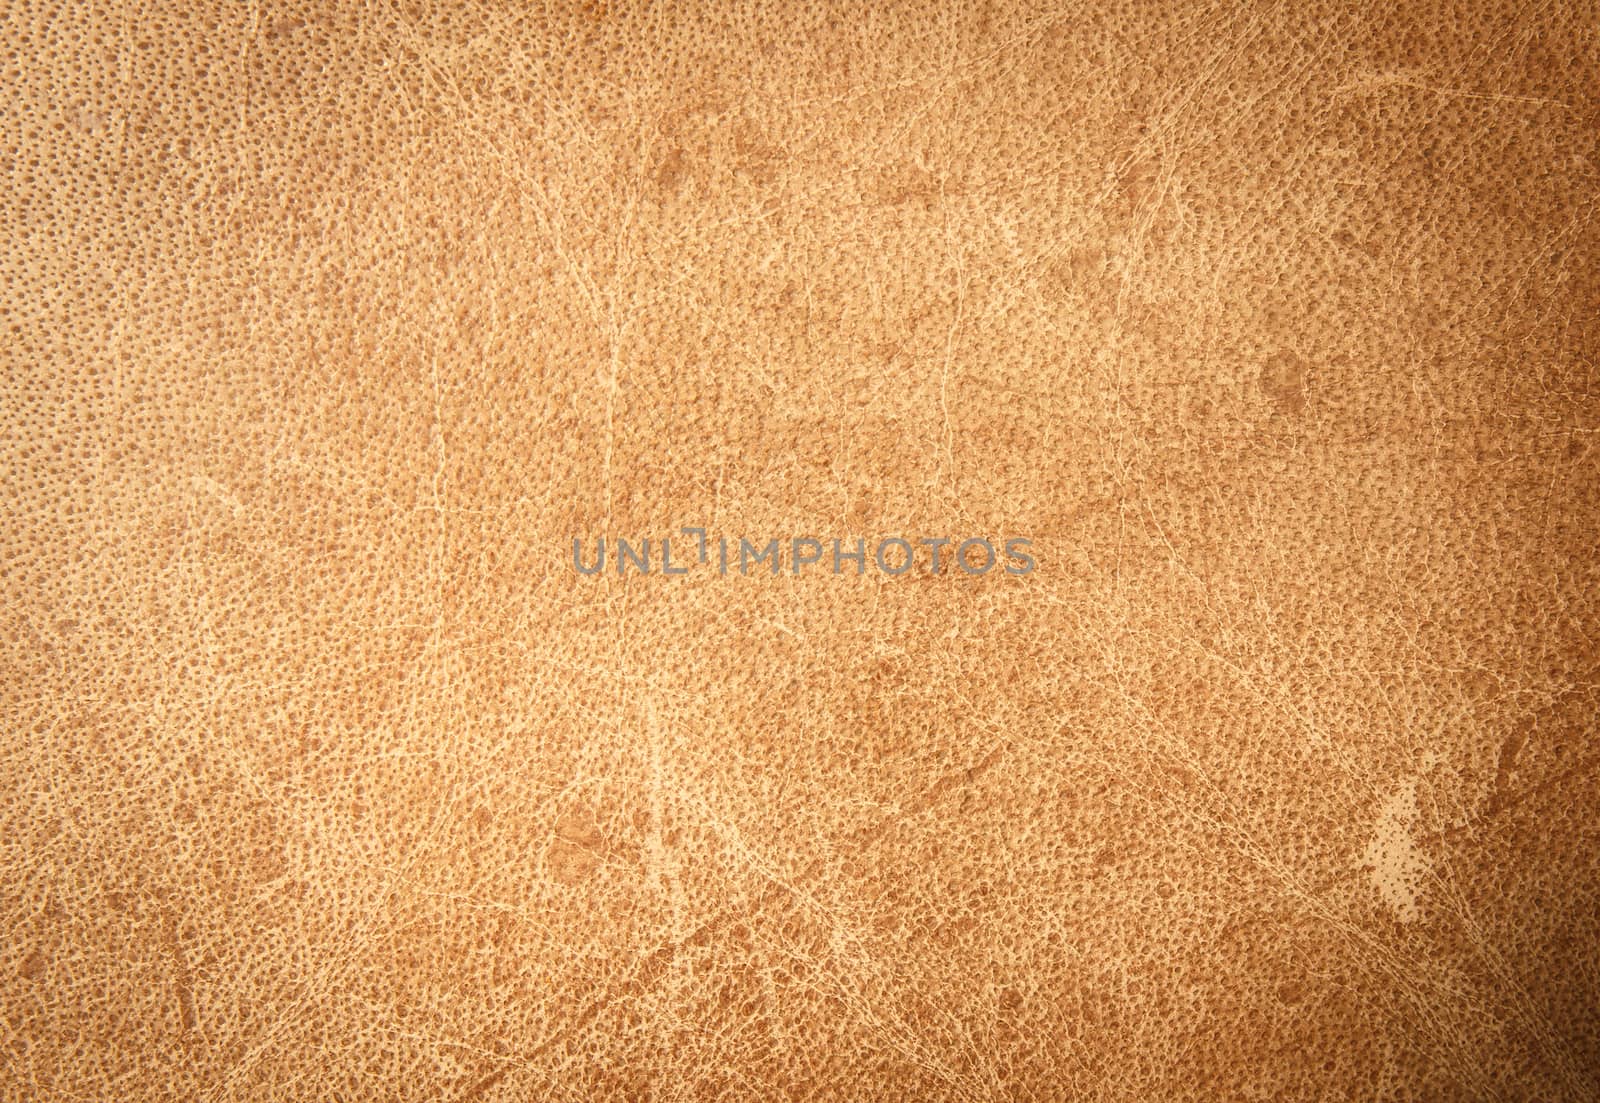 Textured of brown leather for background